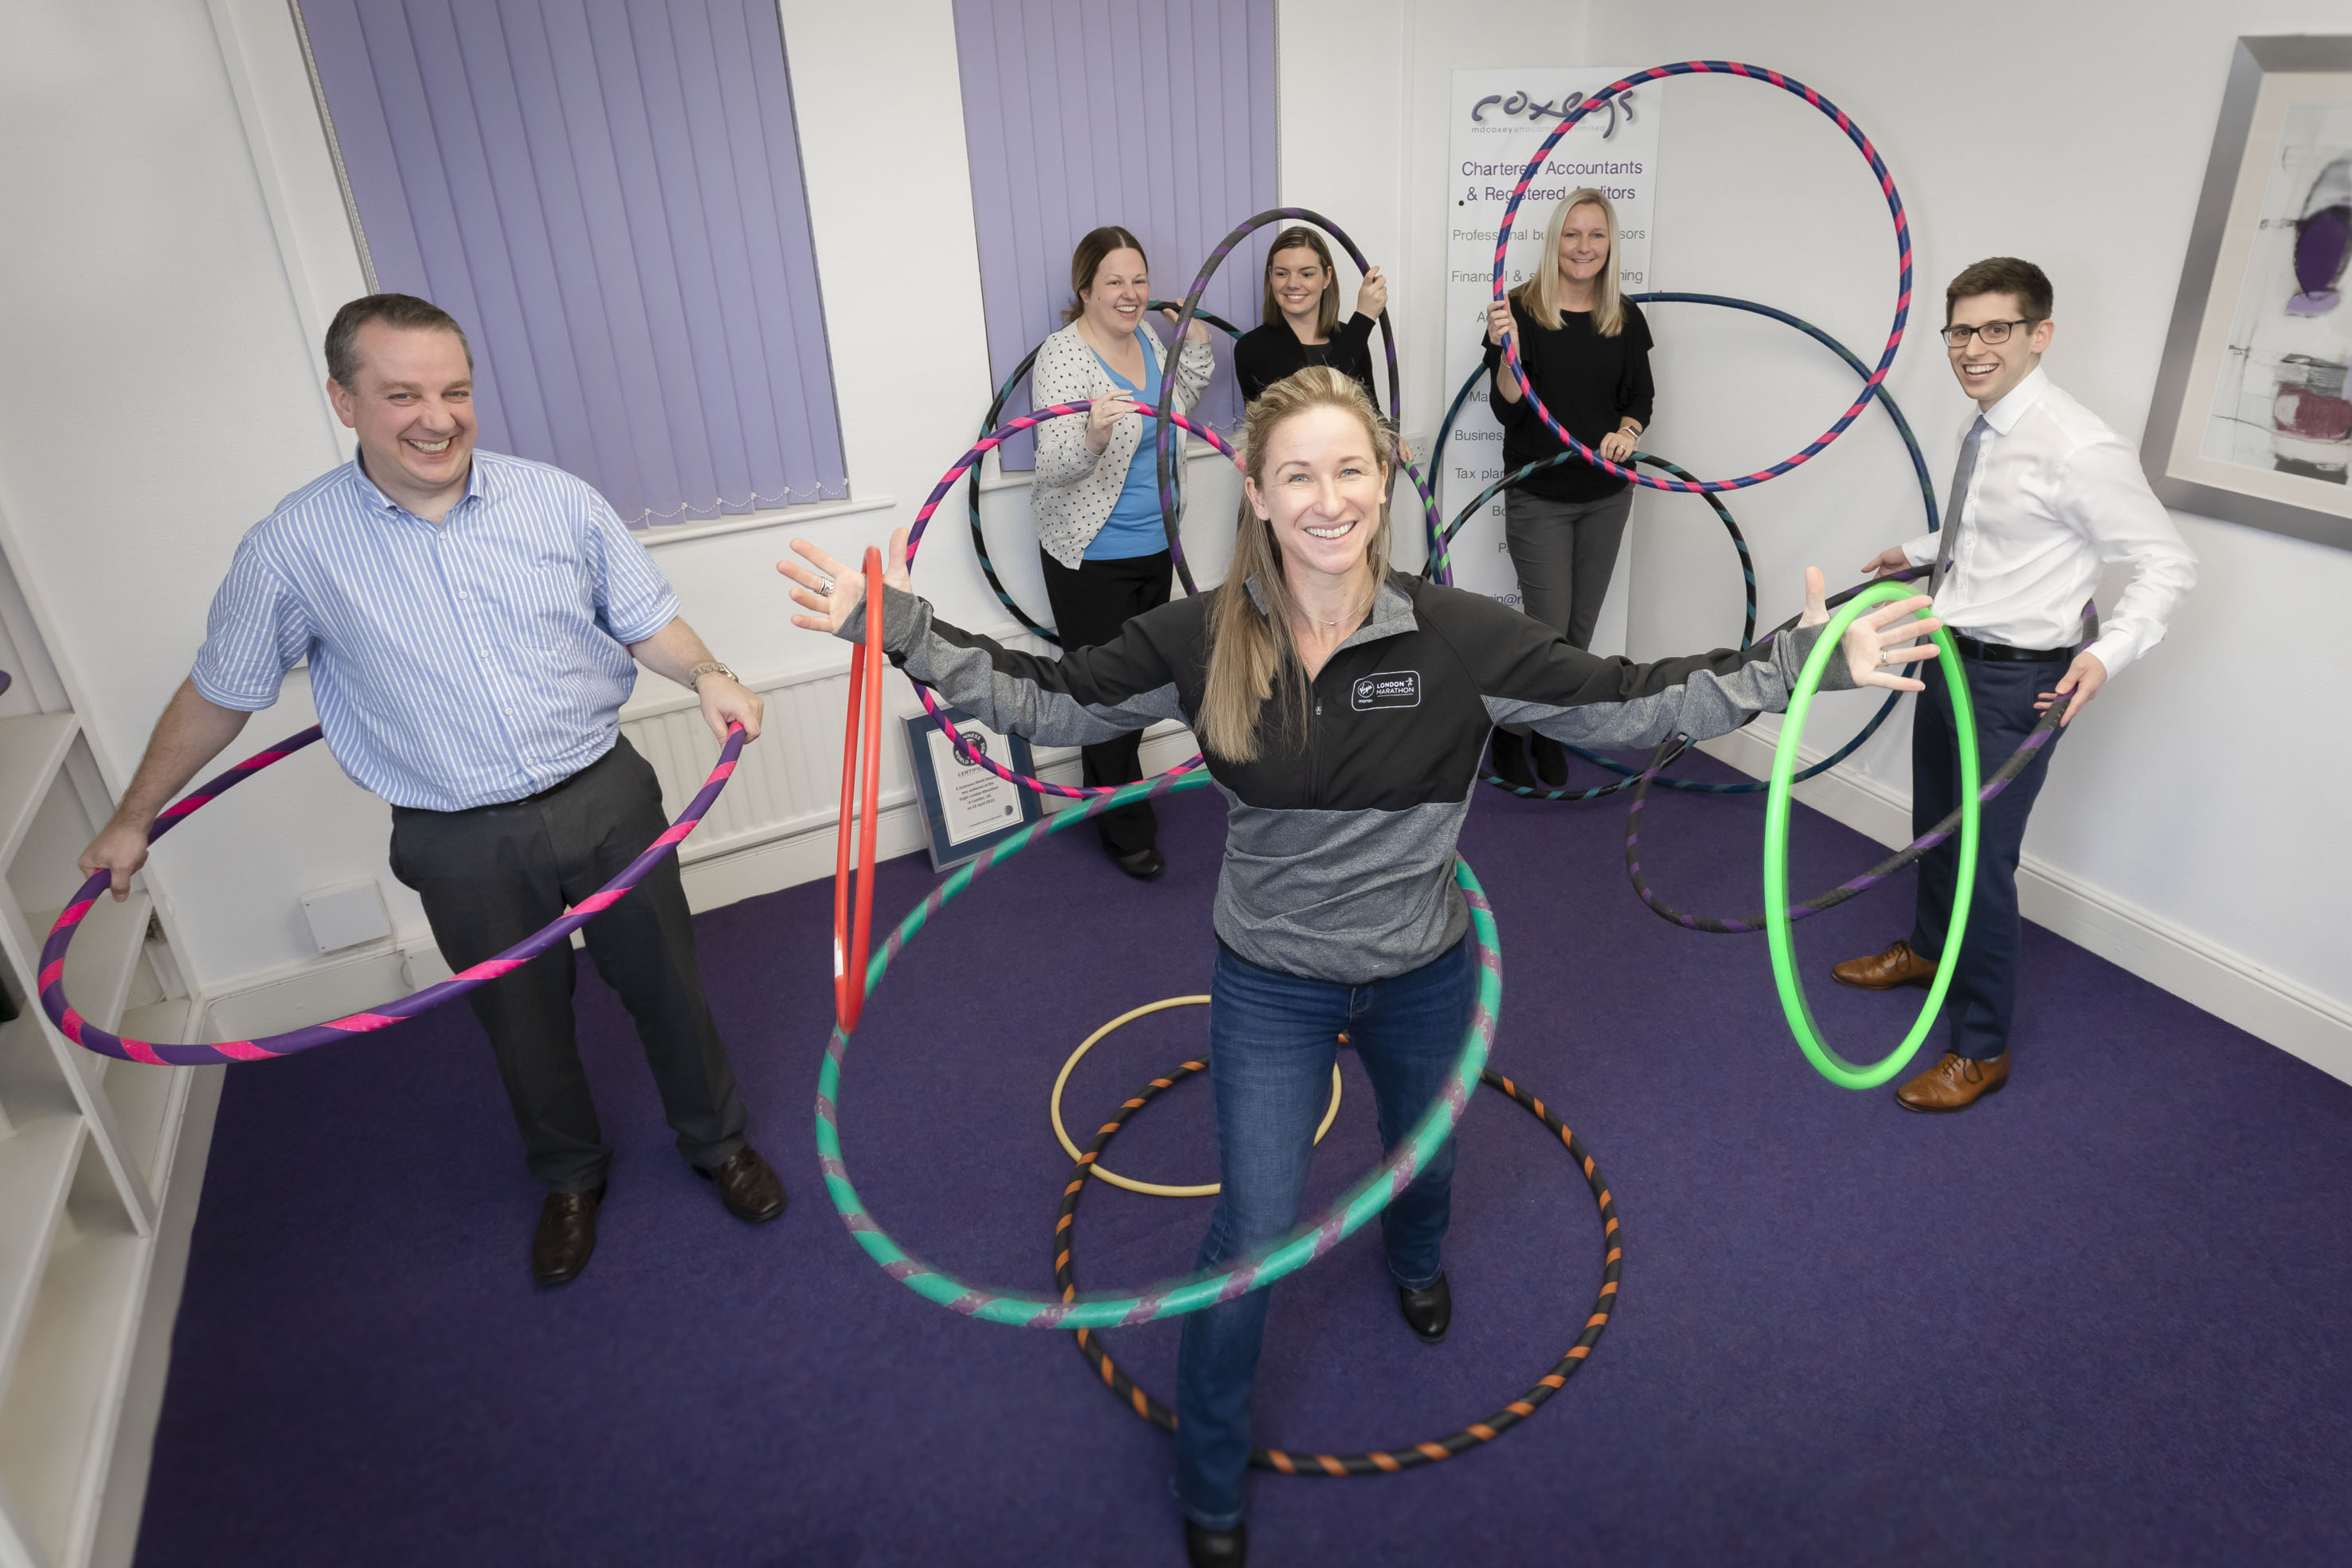 World record-breaking hula hooper building business empire by tackling workplace stress 